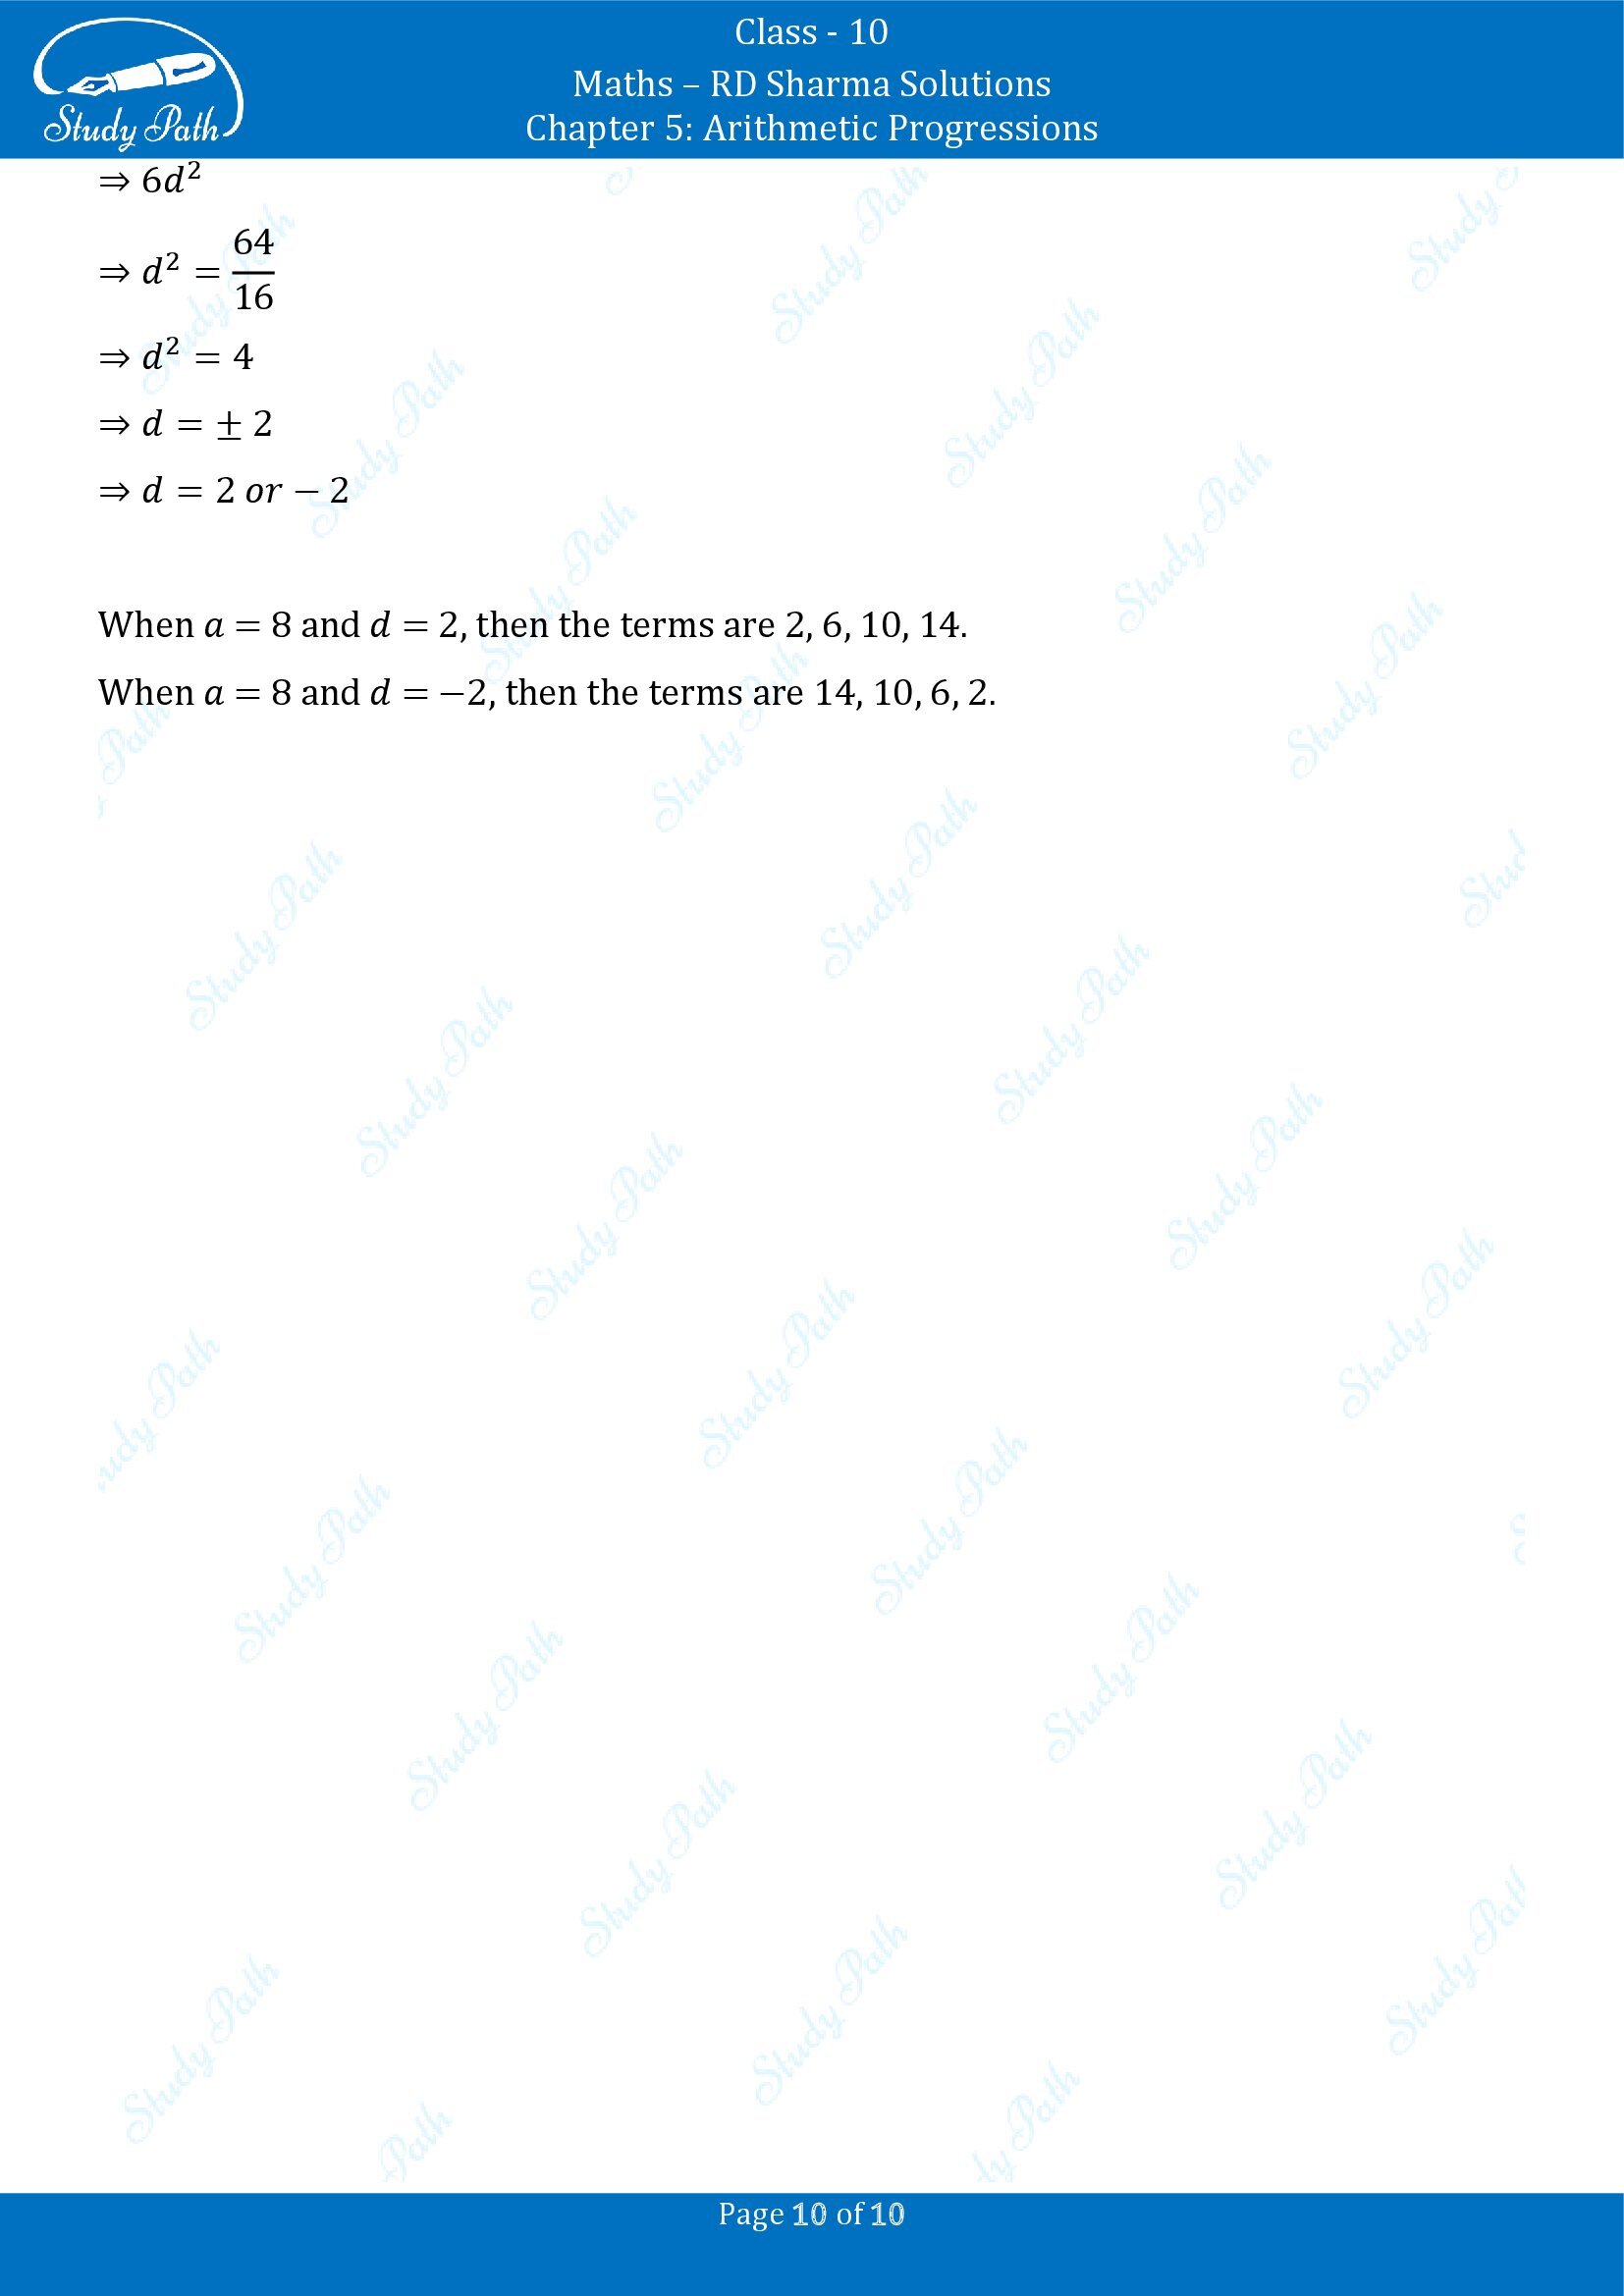 RD Sharma Solutions Class 10 Chapter 5 Arithmetic Progressions Exercise 5.5 00010